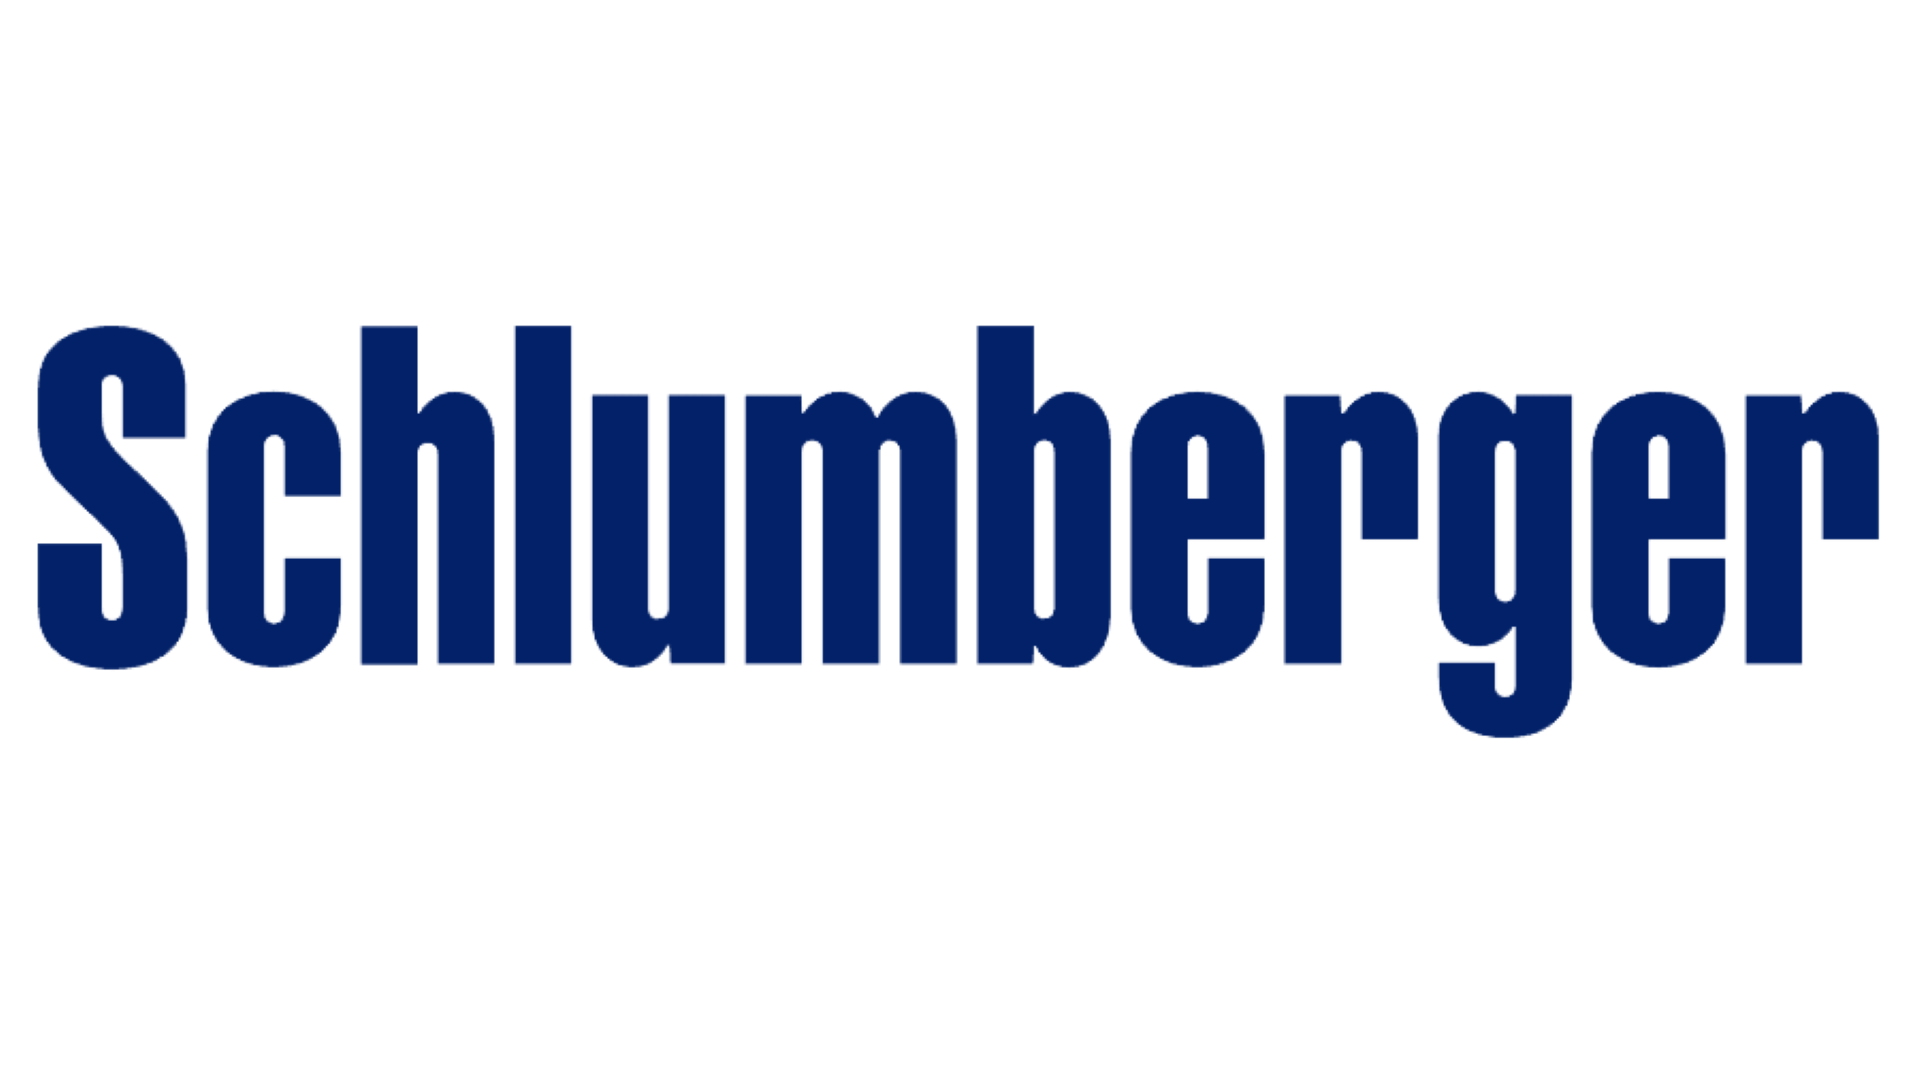 SCHLUMBERGER PNG.png